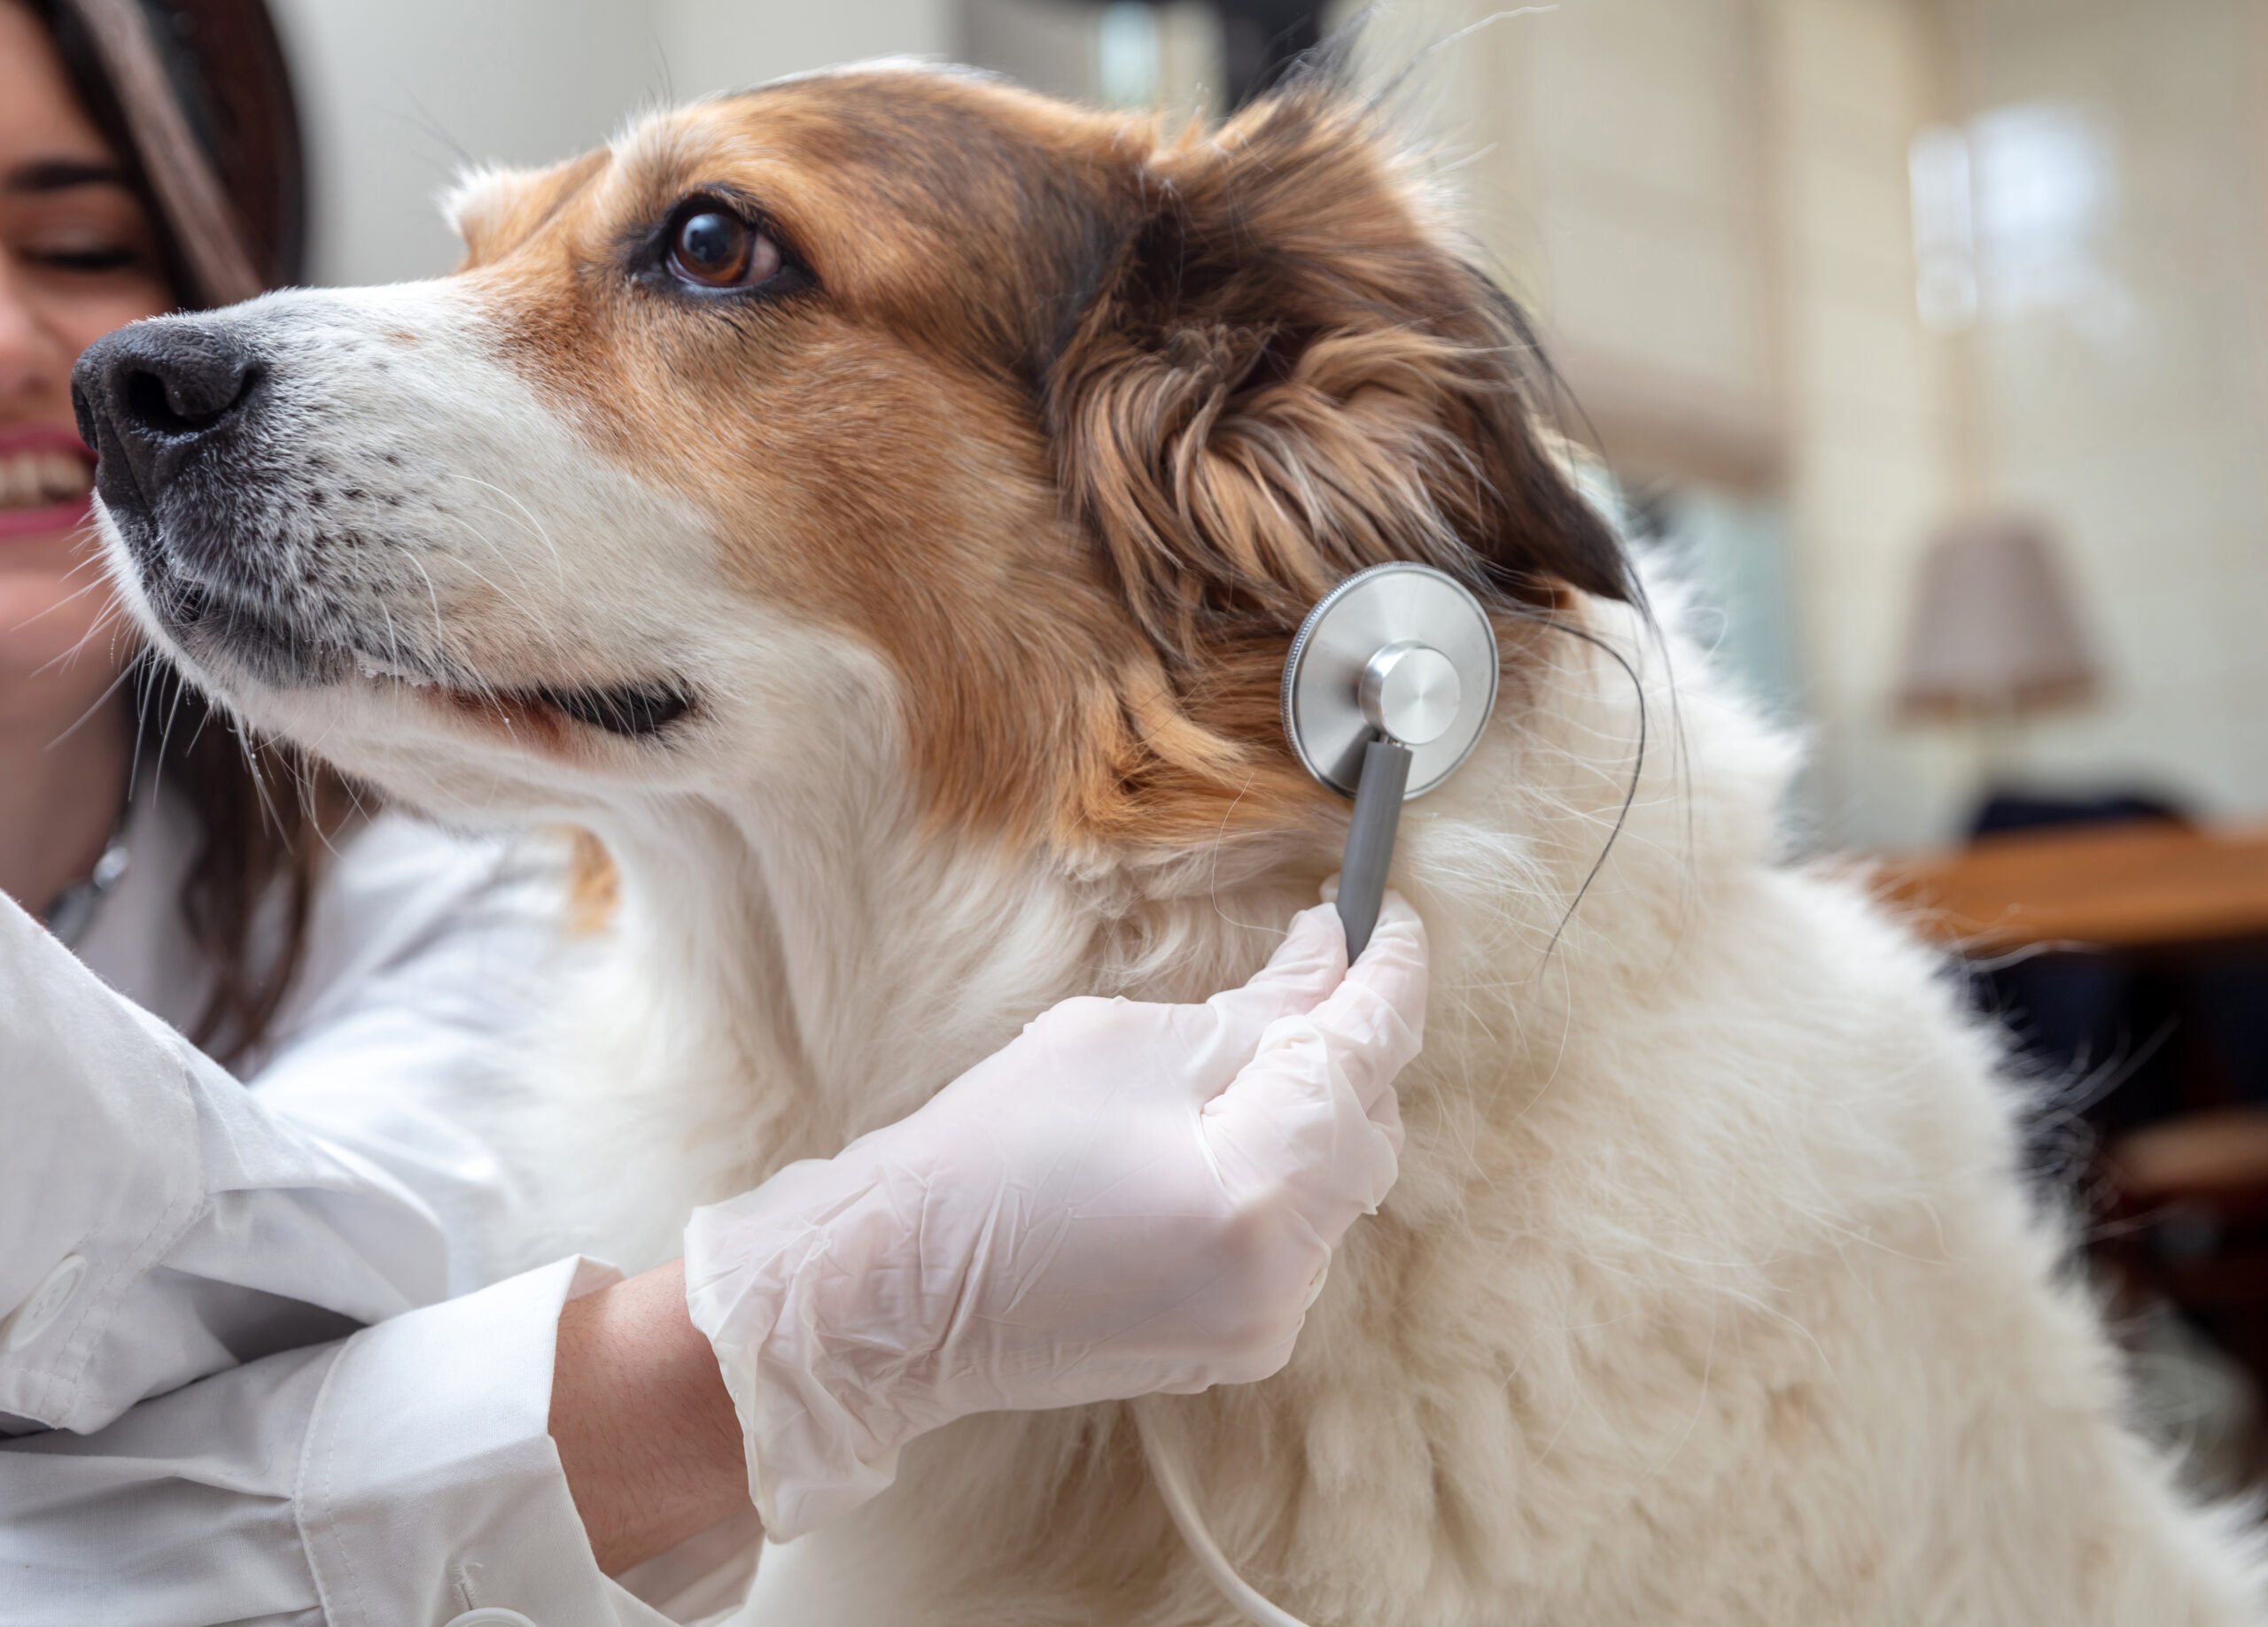 Vet clinic. Veterinarian examine a dog with a medical stethoscope, close up. Pet checkup